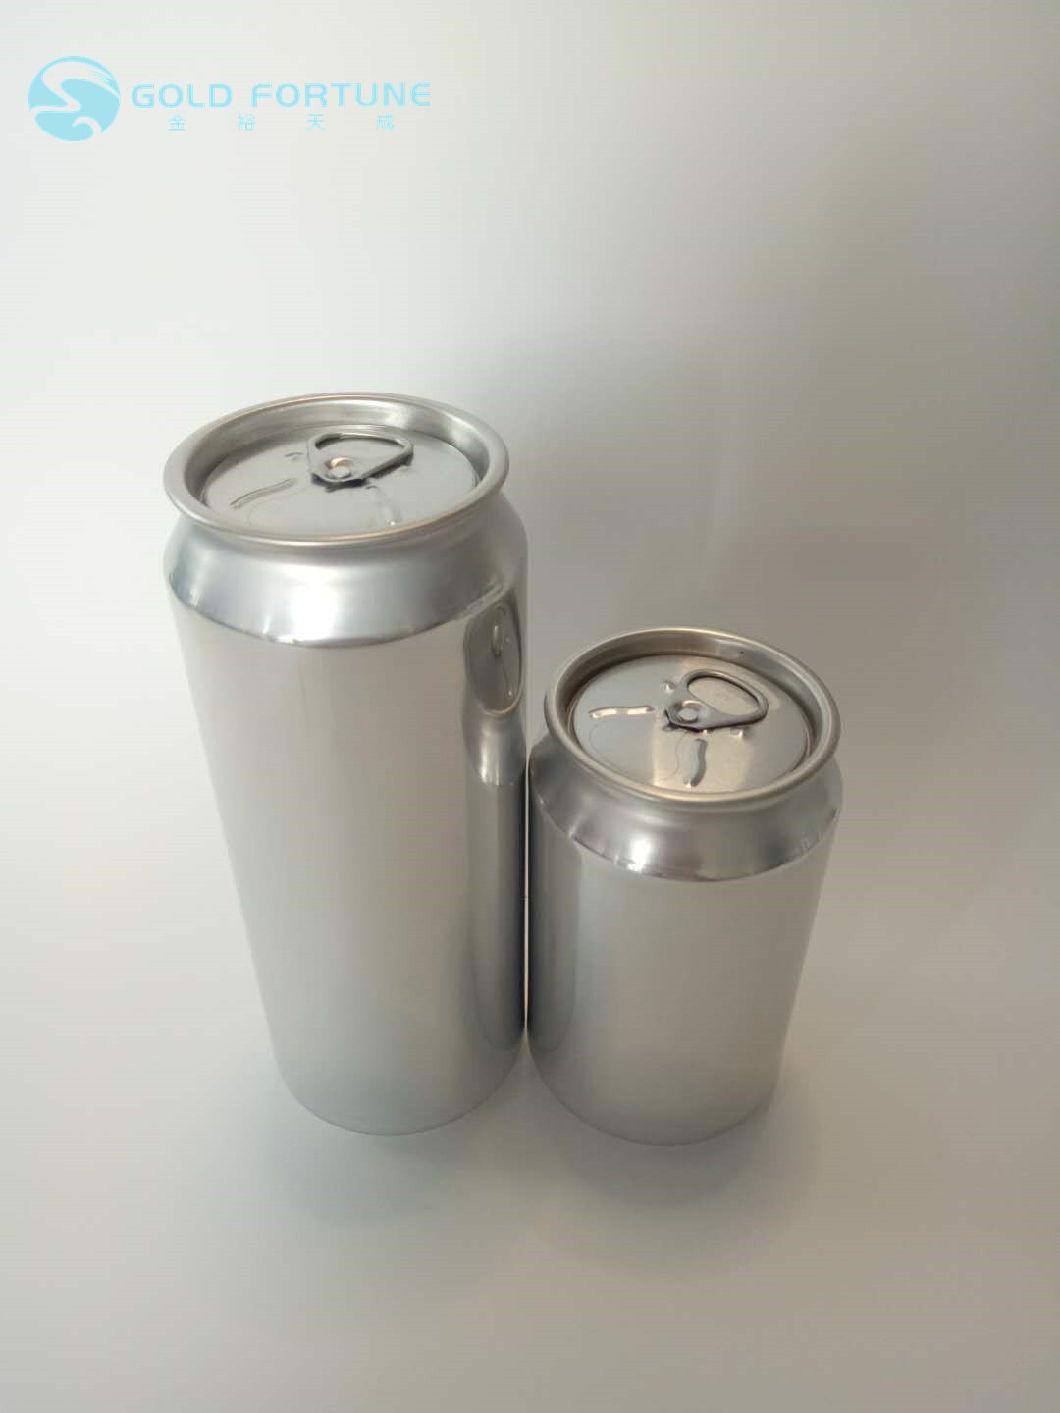 Factory Price 200ml 250ml 330ml 500ml Aluminium Beverage Beer Cans with Lids